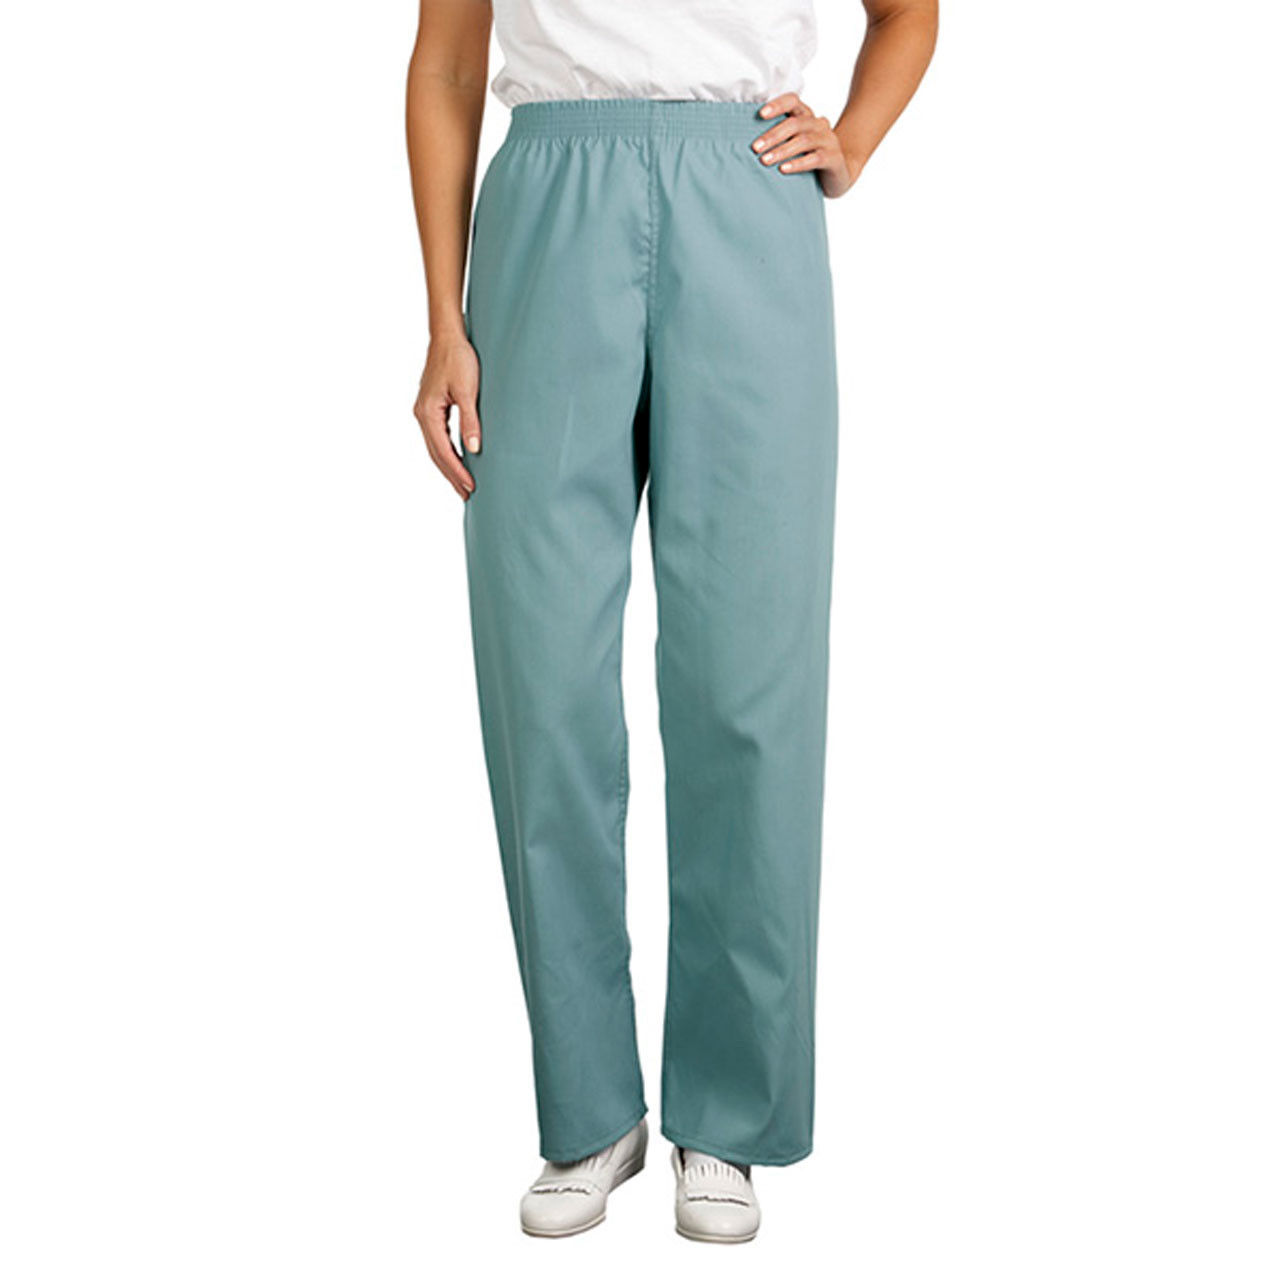 Where are these scrub pants suitable for use?